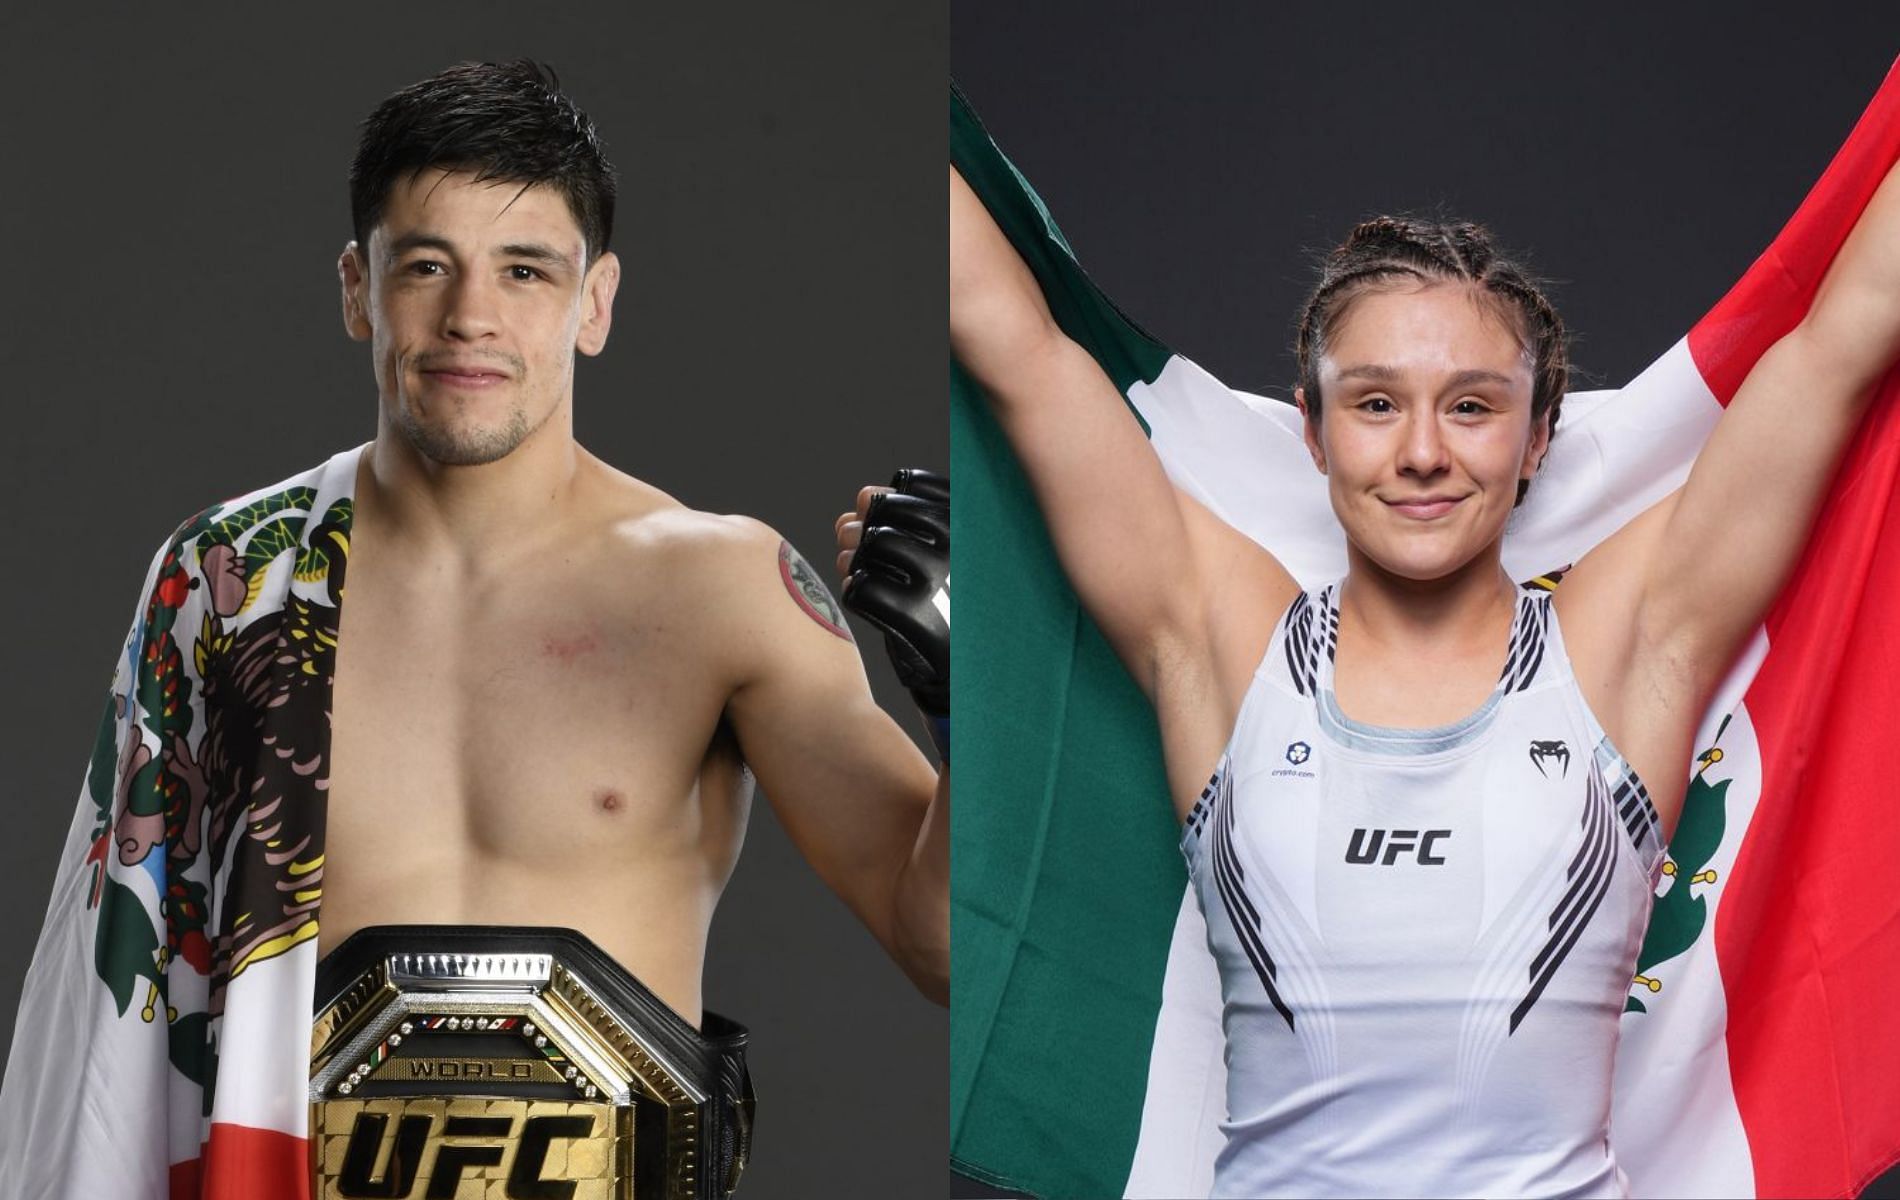 Which of these 4 fighters will be #UFC Champion?